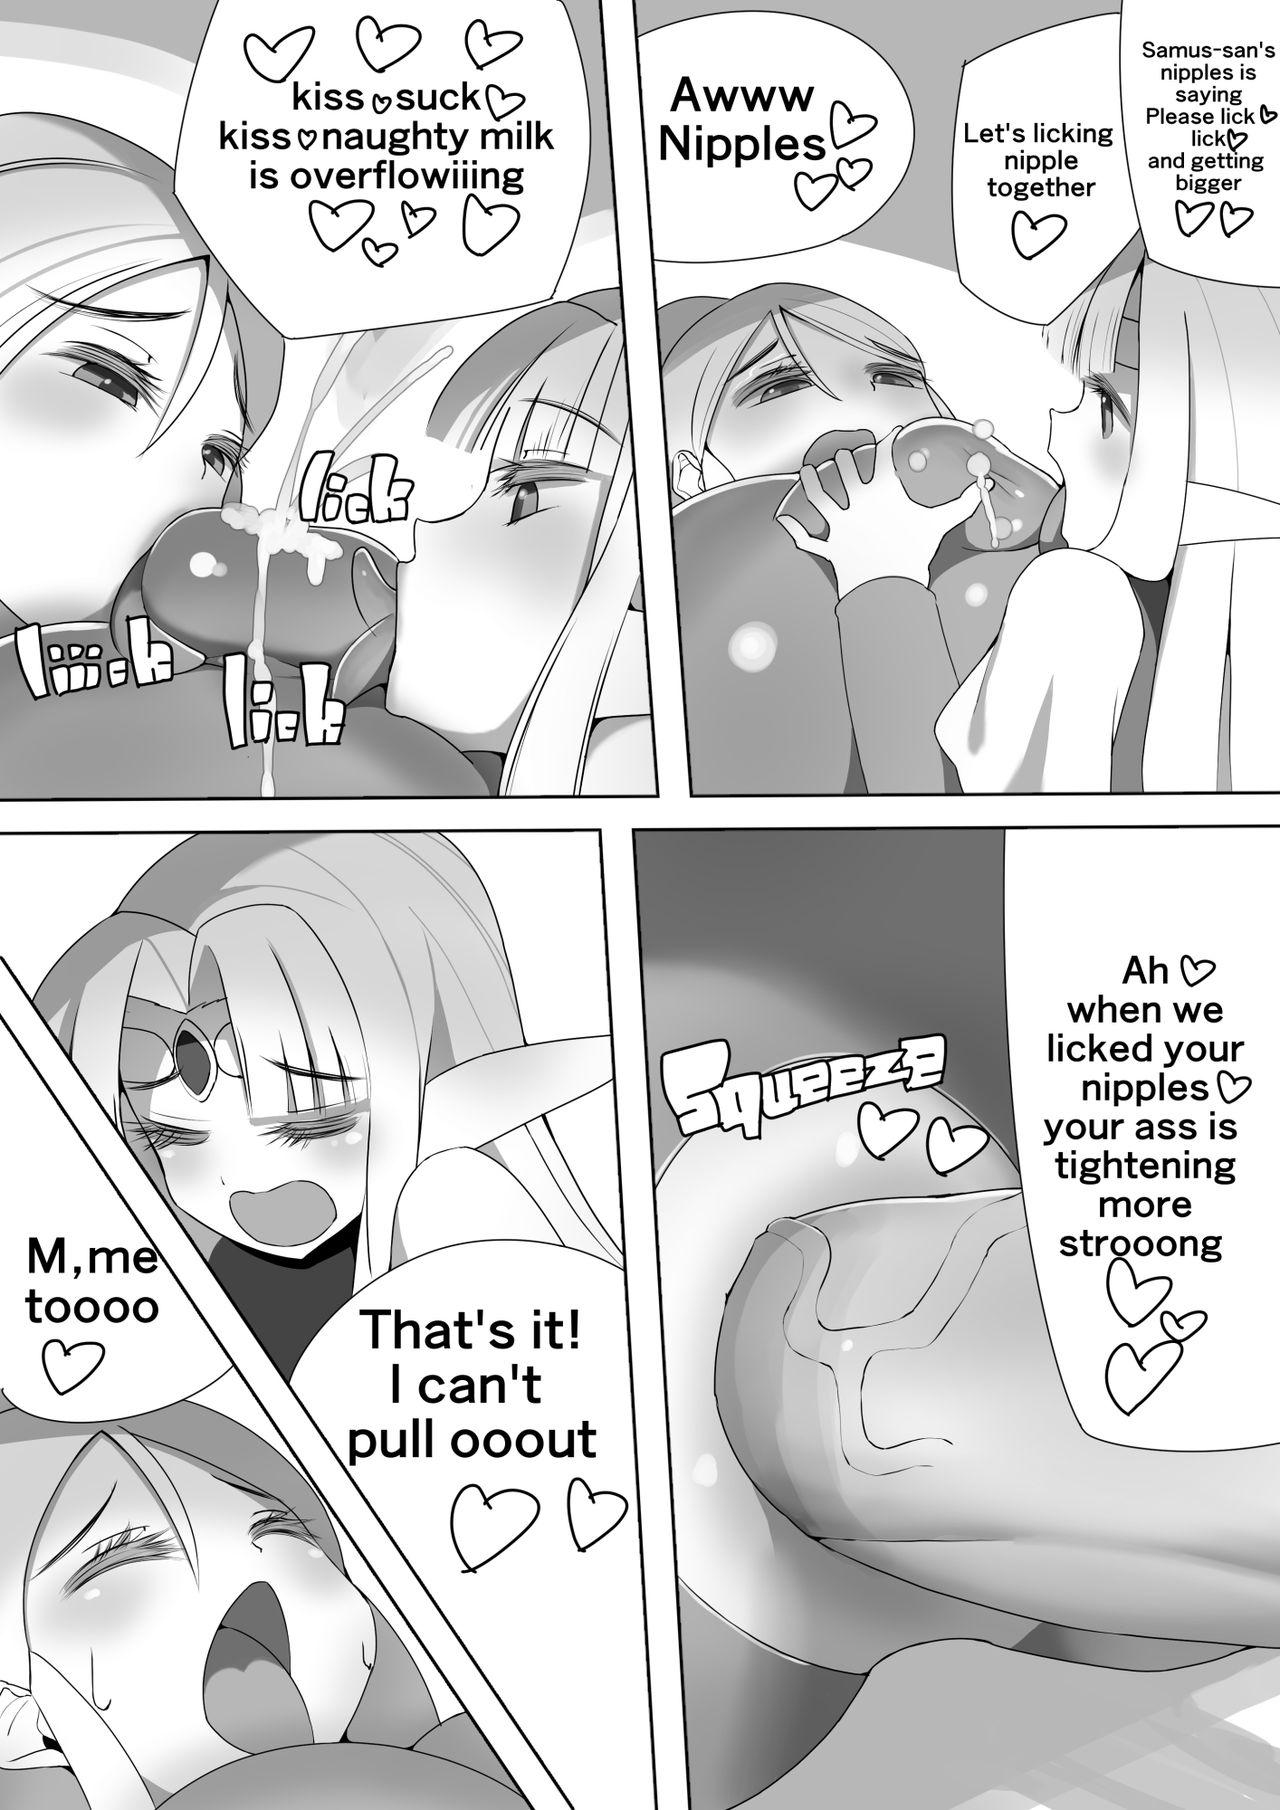 Dominant Samus's Daily Life - The legend of zelda Metroid Freeteenporn - Page 16